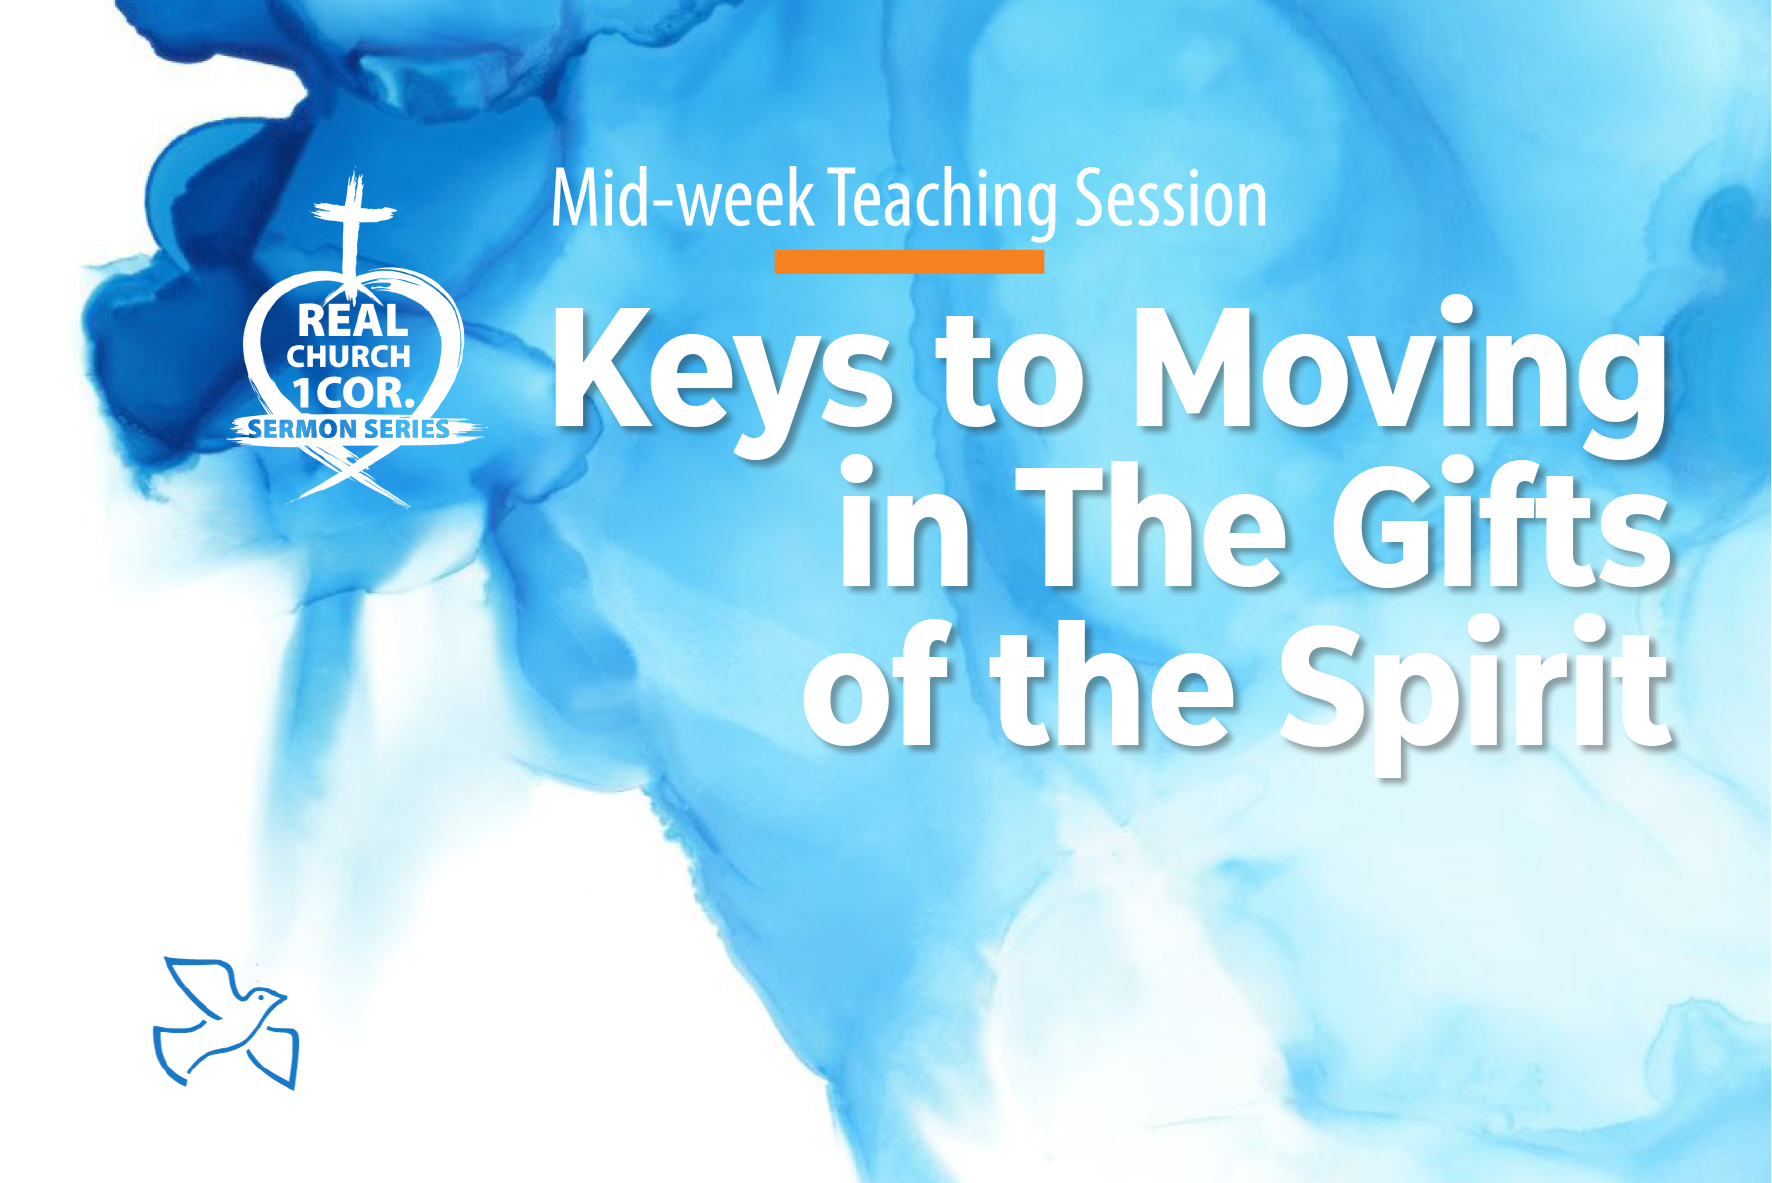 MWTS - Keys to Moving in the Gifts of the Spirit